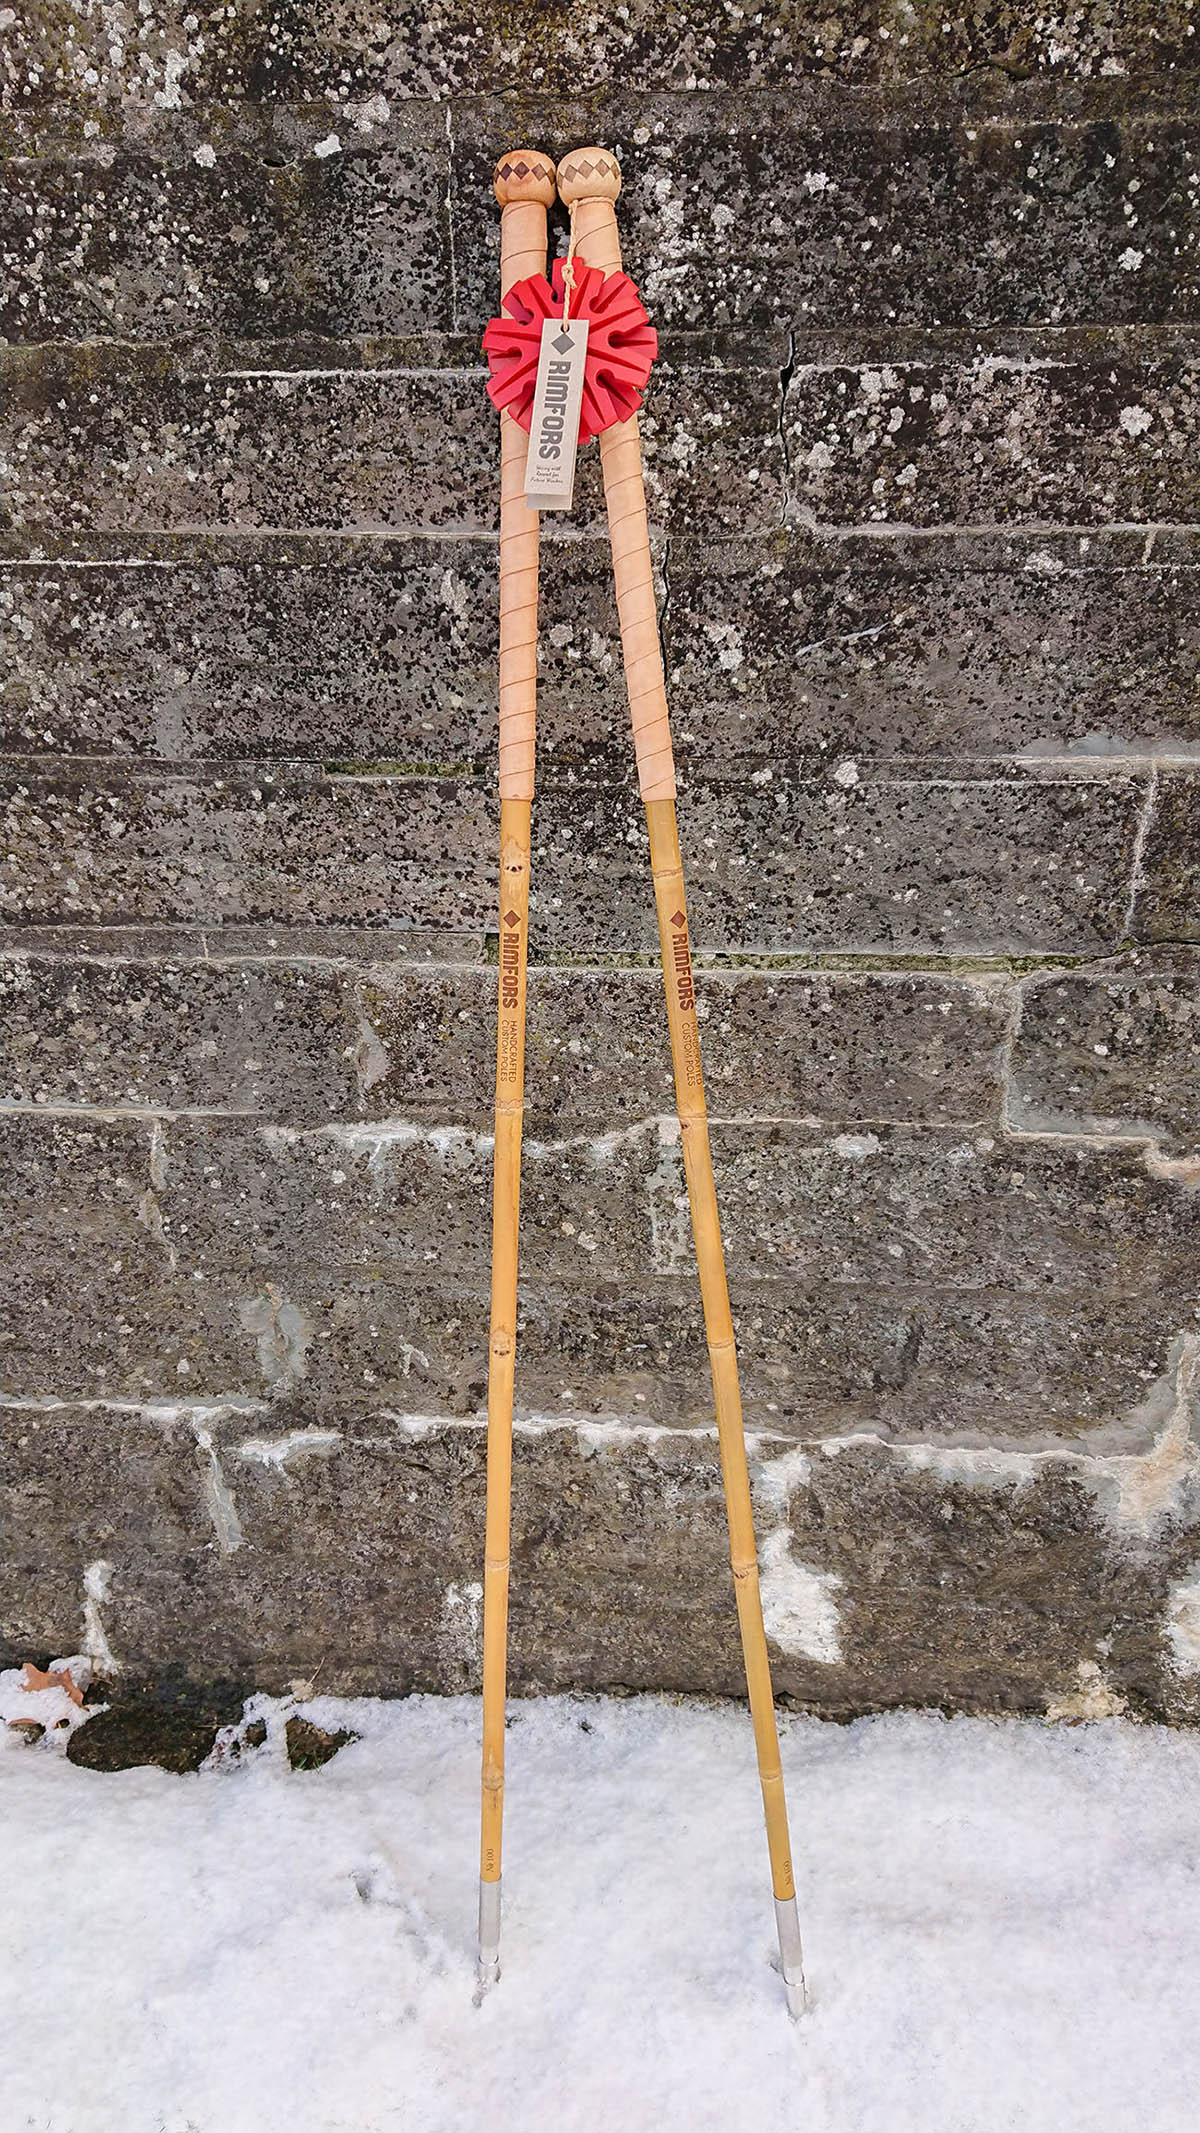 Sustainable and durable bamboo ski poles inspired by Les Bâtons d'Alain (Chamonix, France) and Les Bâtons (Corsier-sur-Vevey, Switzerland).